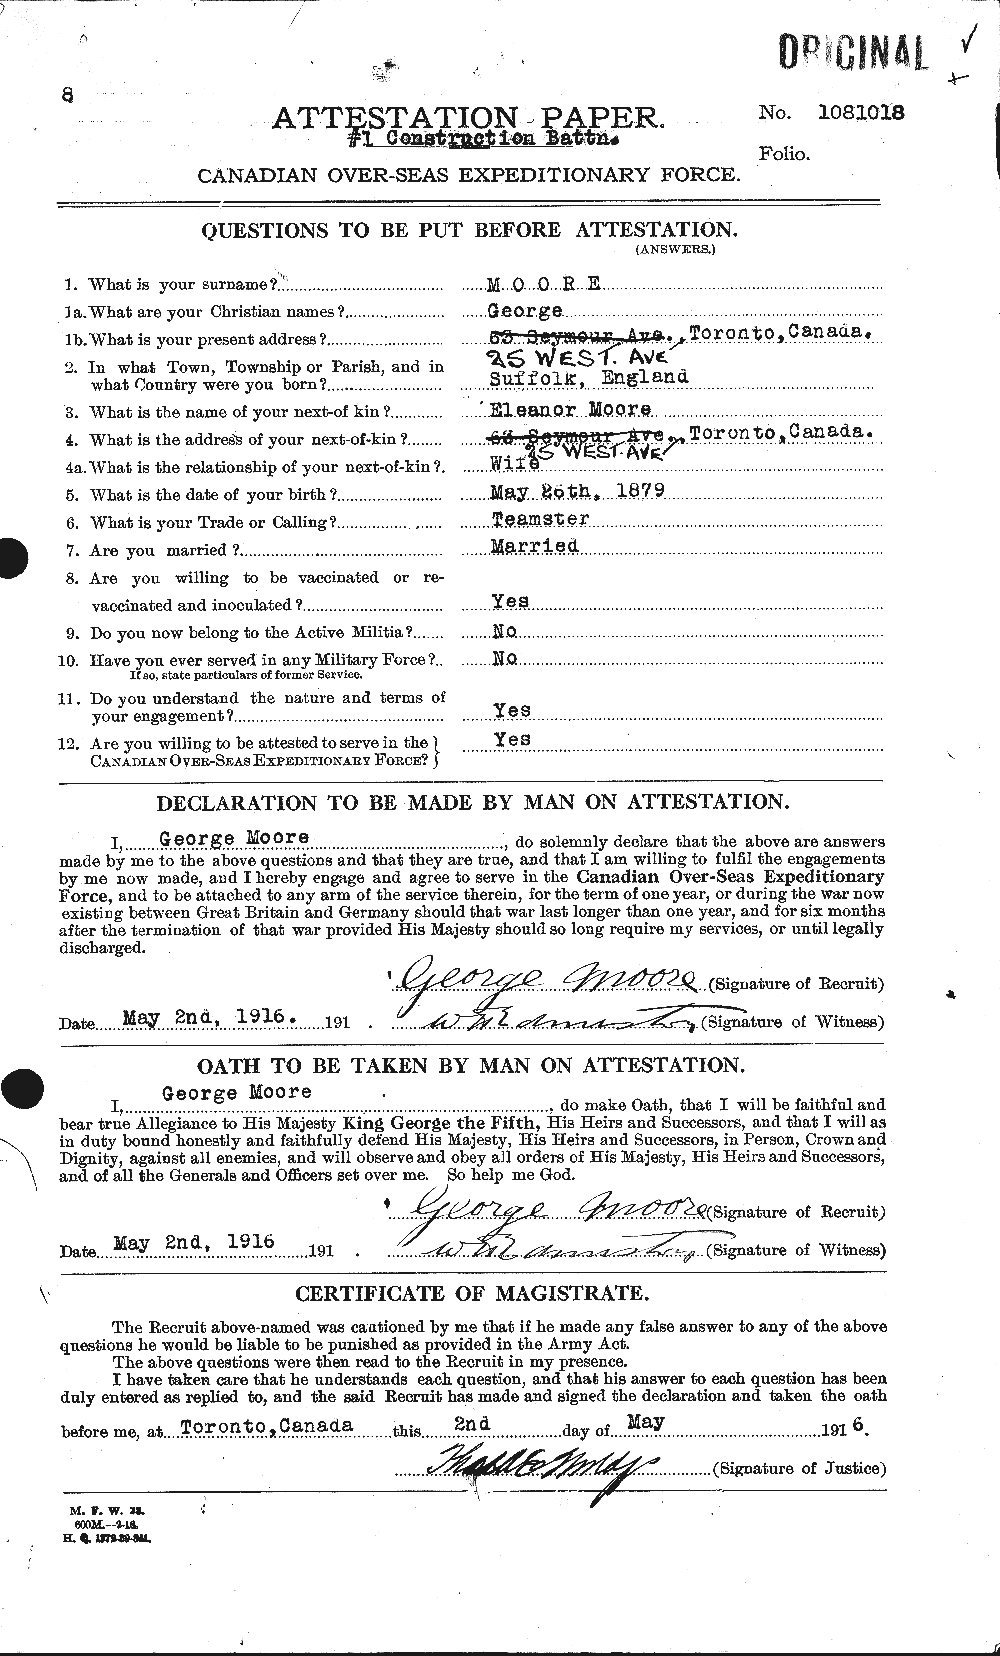 Personnel Records of the First World War - CEF 509398a